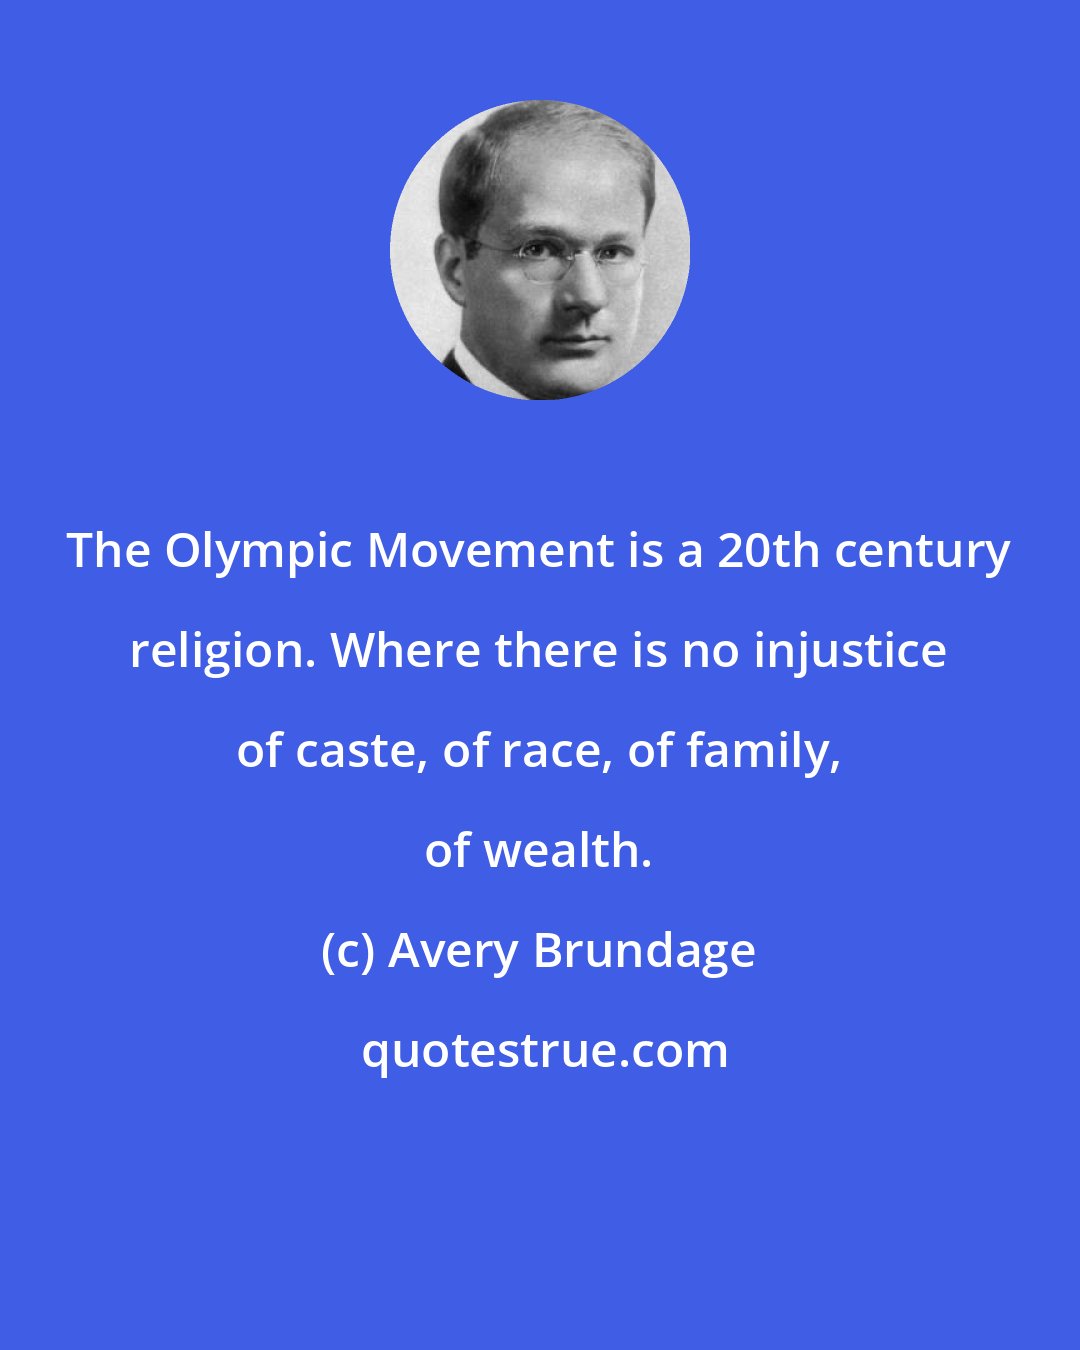 Avery Brundage: The Olympic Movement is a 20th century religion. Where there is no injustice of caste, of race, of family, of wealth.